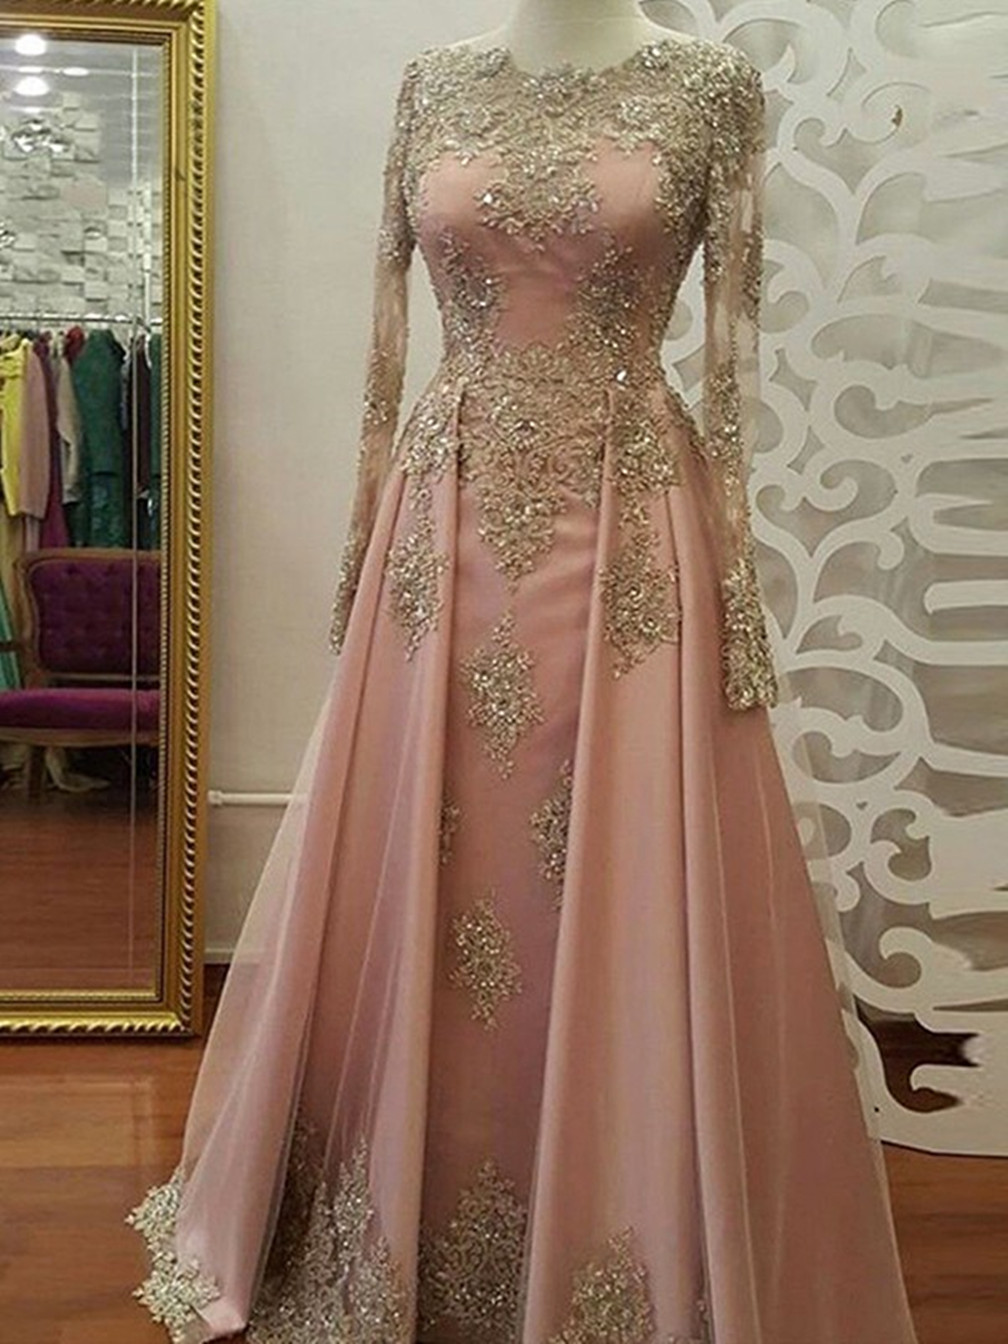 Women A-line/princess Lace Prom Dresses Long Sleeves Evening Gowns Appliques Formal Party Dress Yp027